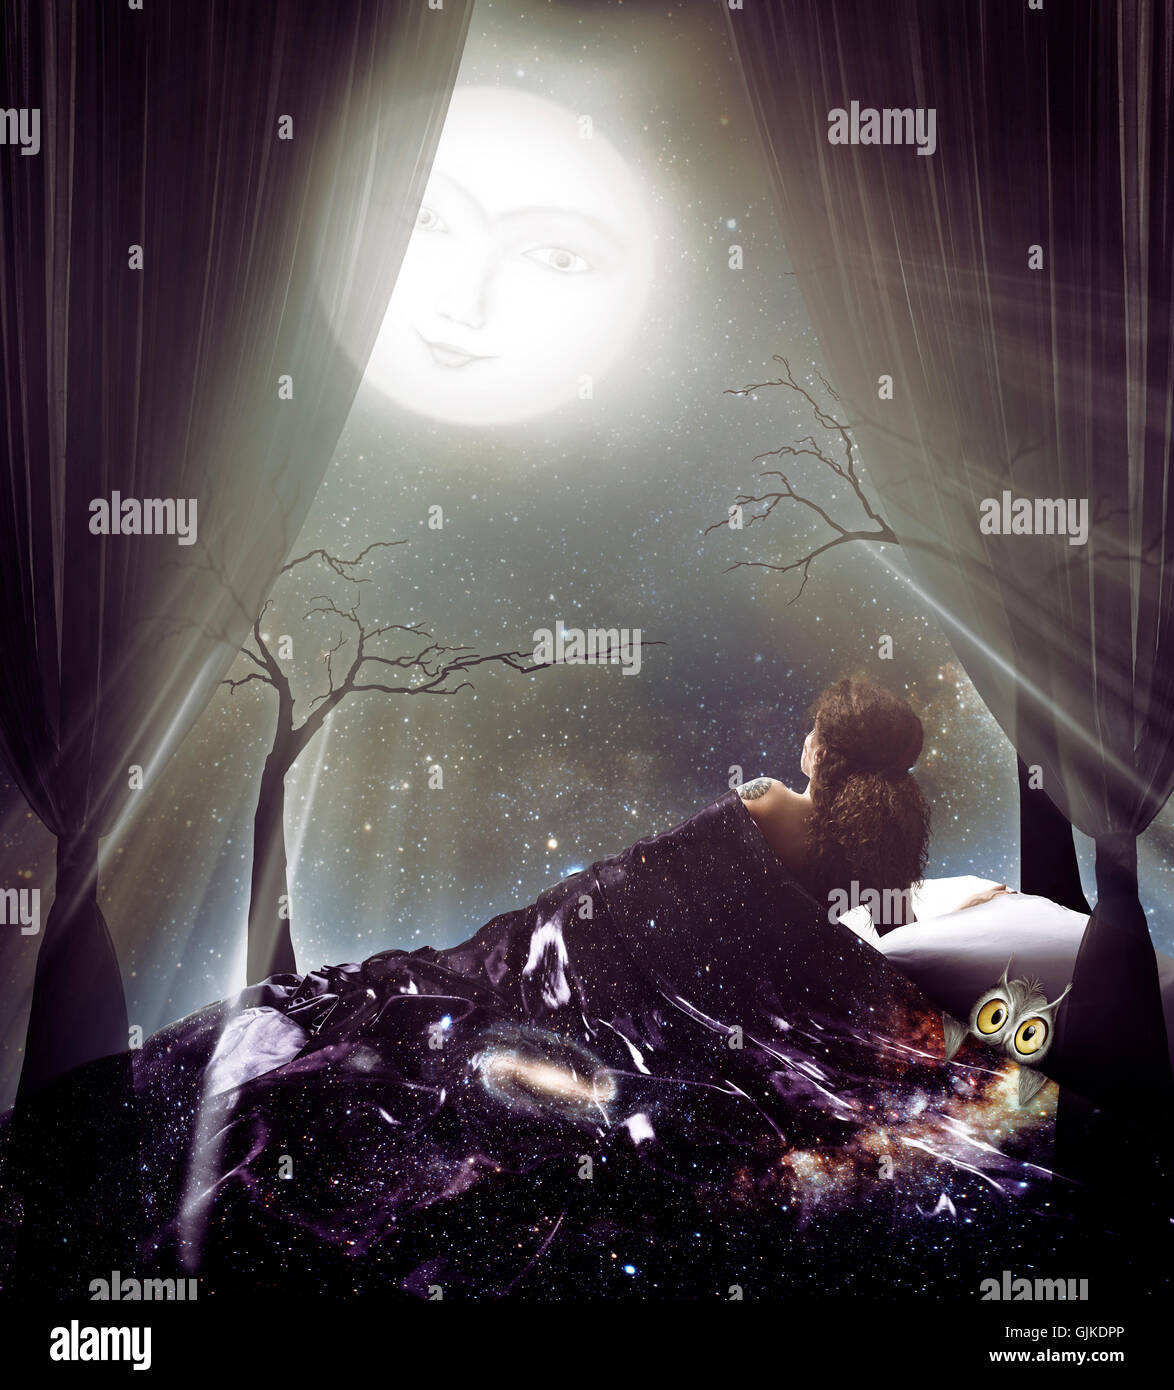 License available at MaximImages.com - Lit by the moonlight woman under the starry sky blanket with an owl under the full moon artistic spiritual phot Stock Photo